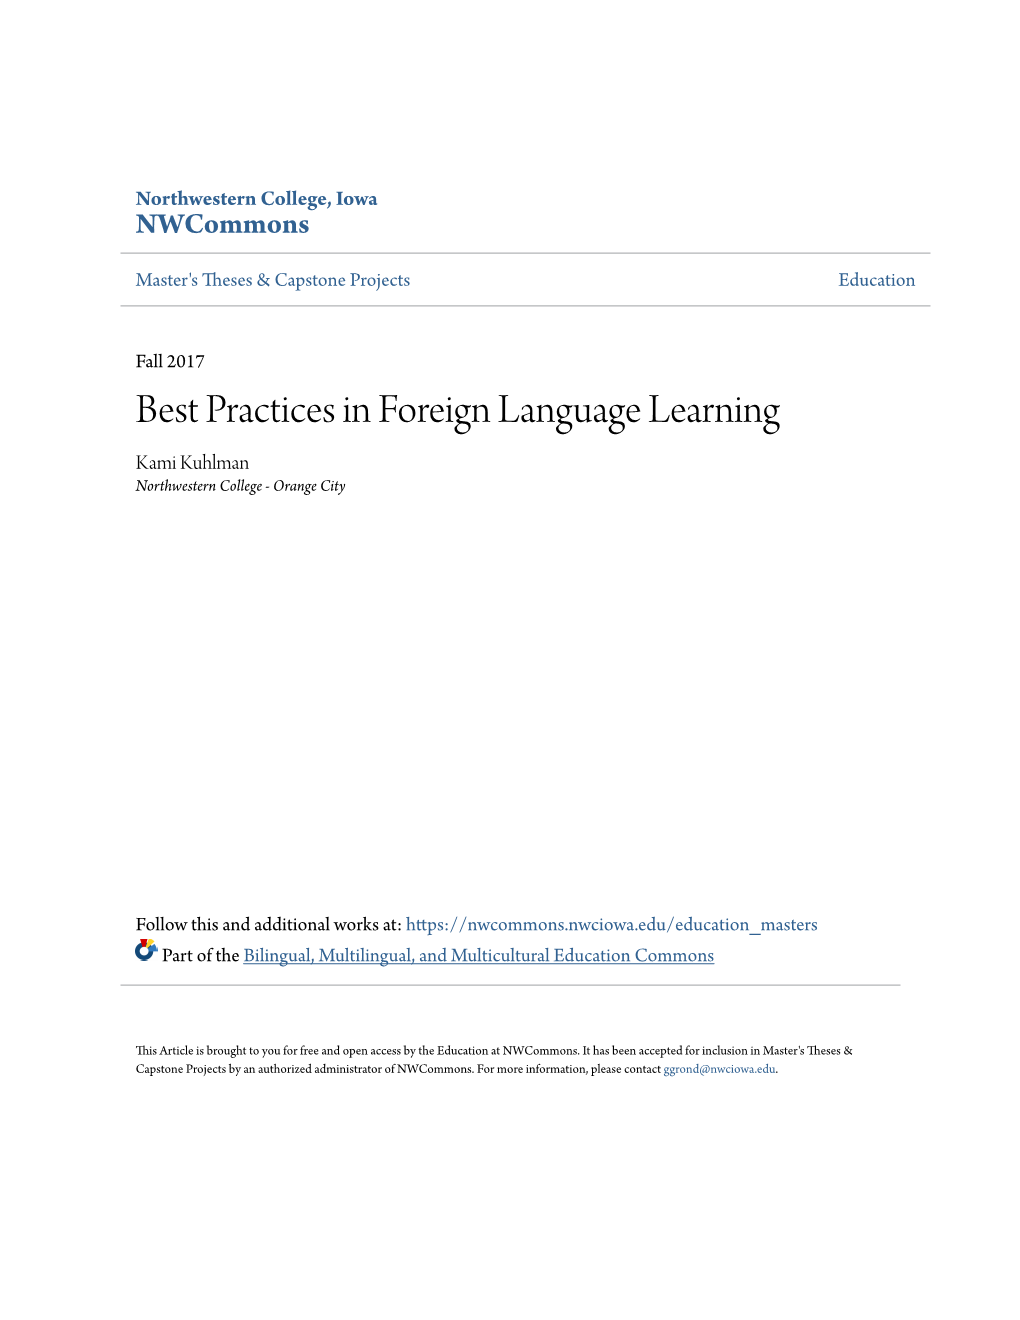 Best Practices in Foreign Language Learning Kami Kuhlman Northwestern College - Orange City